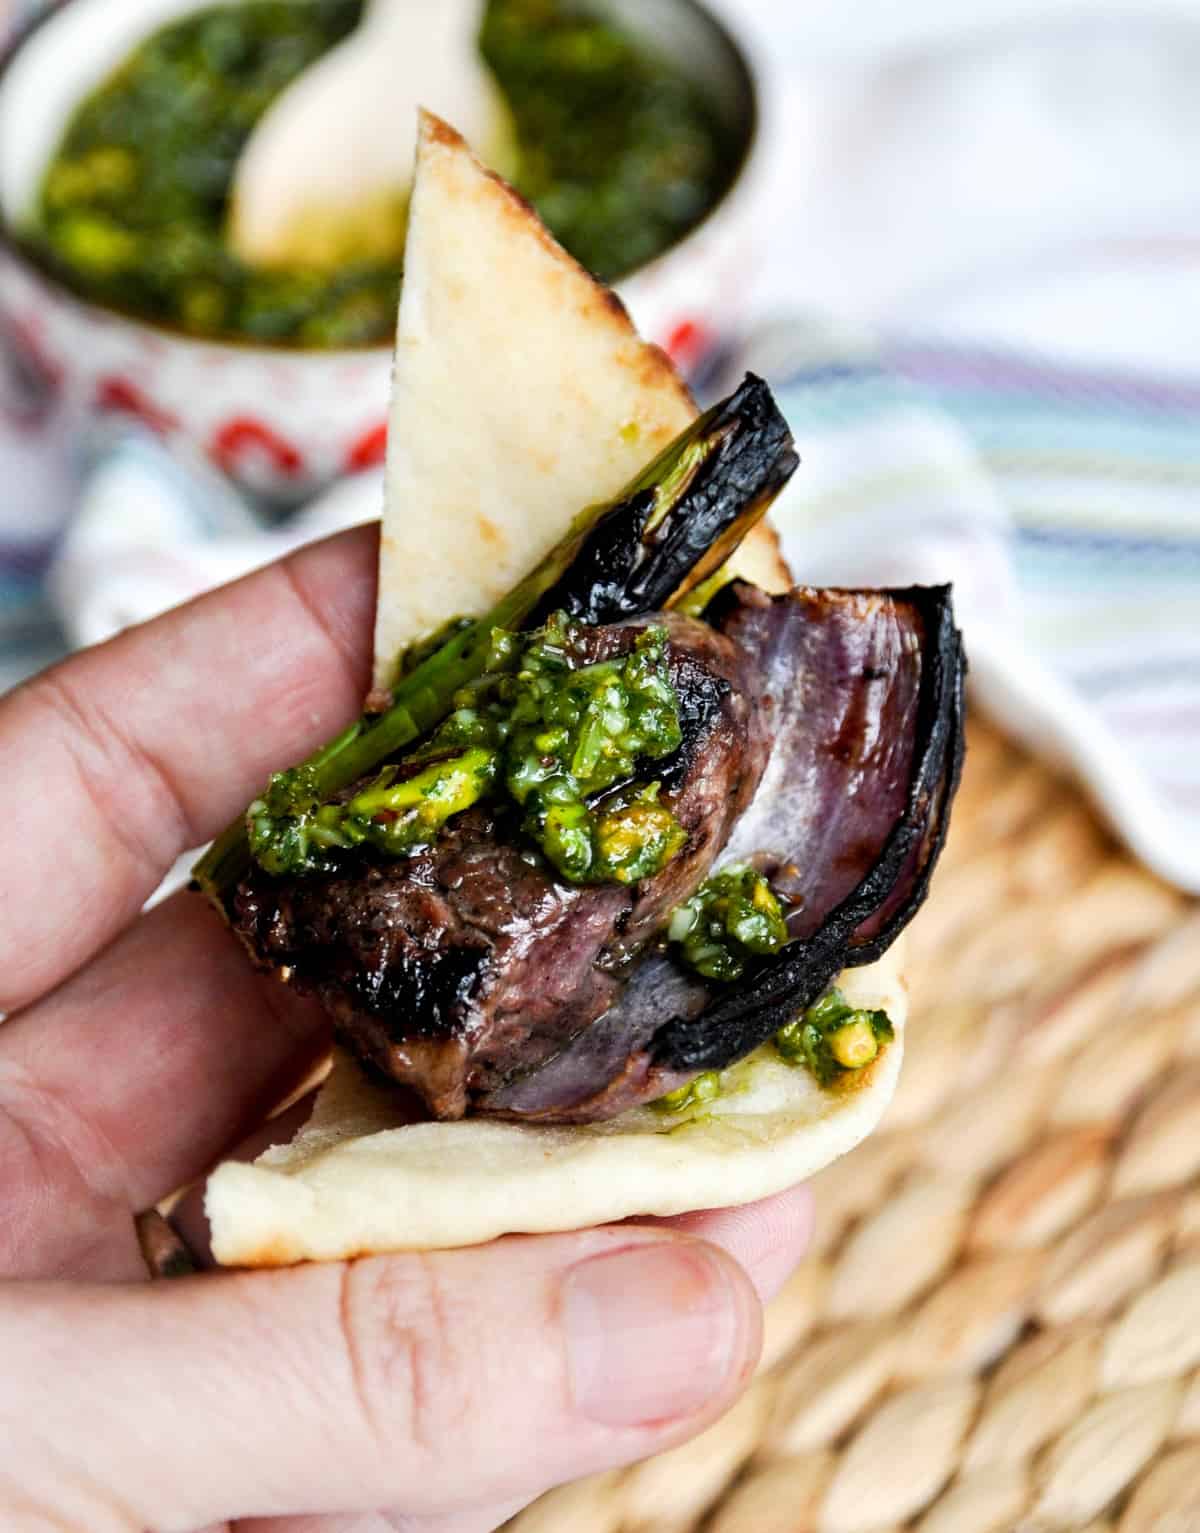 Lamb Asparagus Kebabs with Pistachio Mint Pesto with flat bread